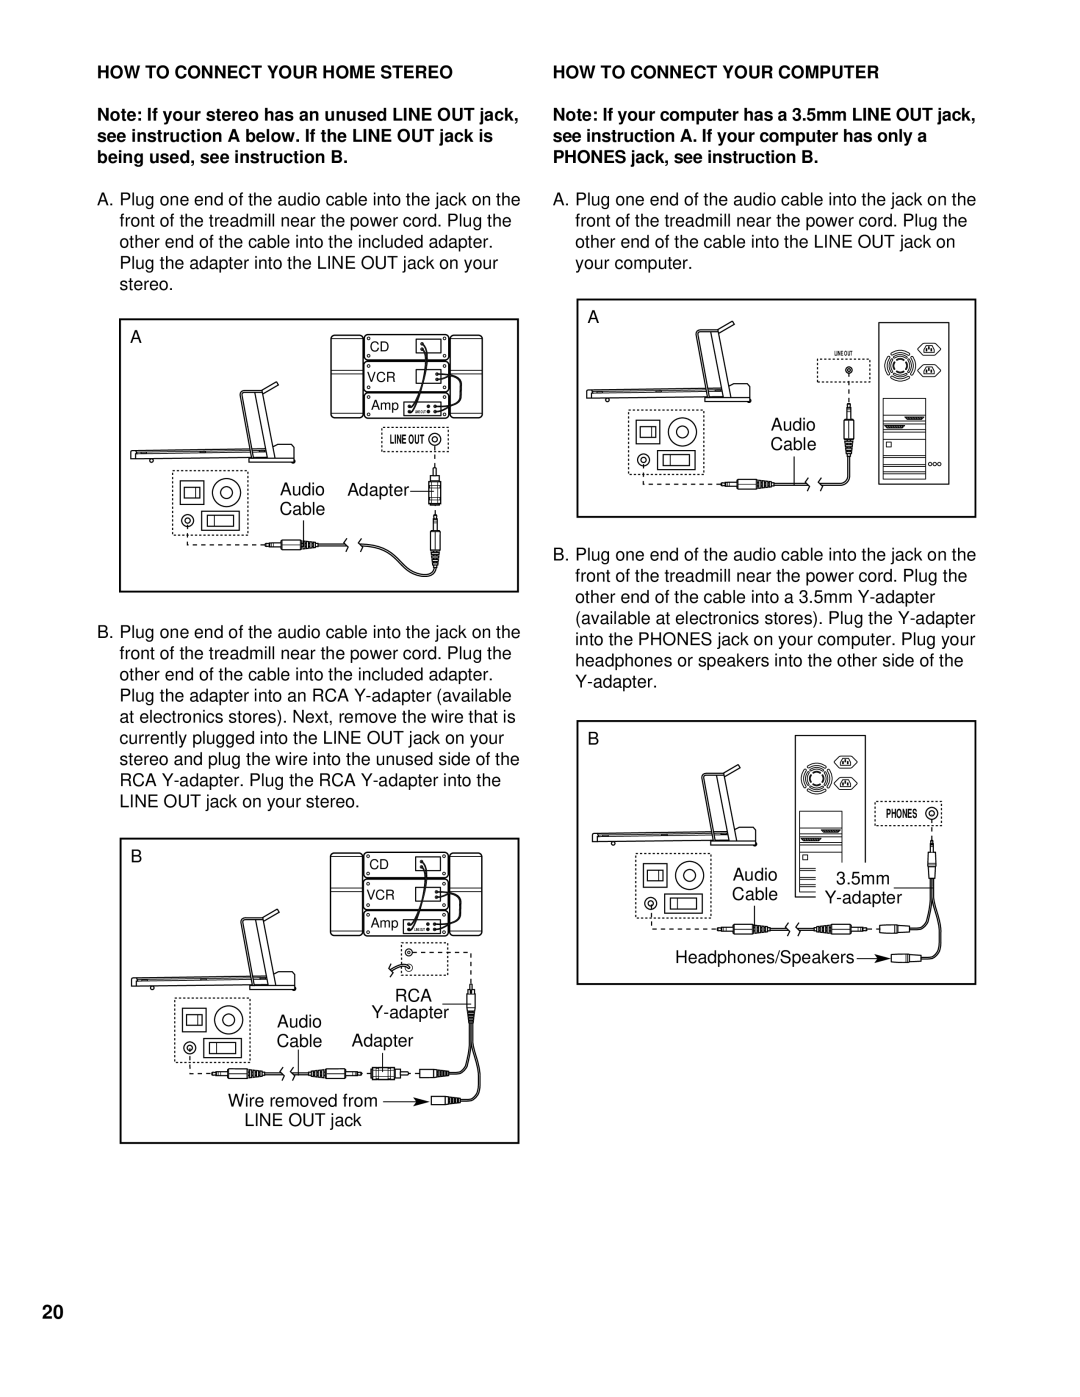 NordicTrack NCTL11990 user manual HOW to Connect Your Home Stereo, Plug the adapter into the Line OUT jack on your stereo 